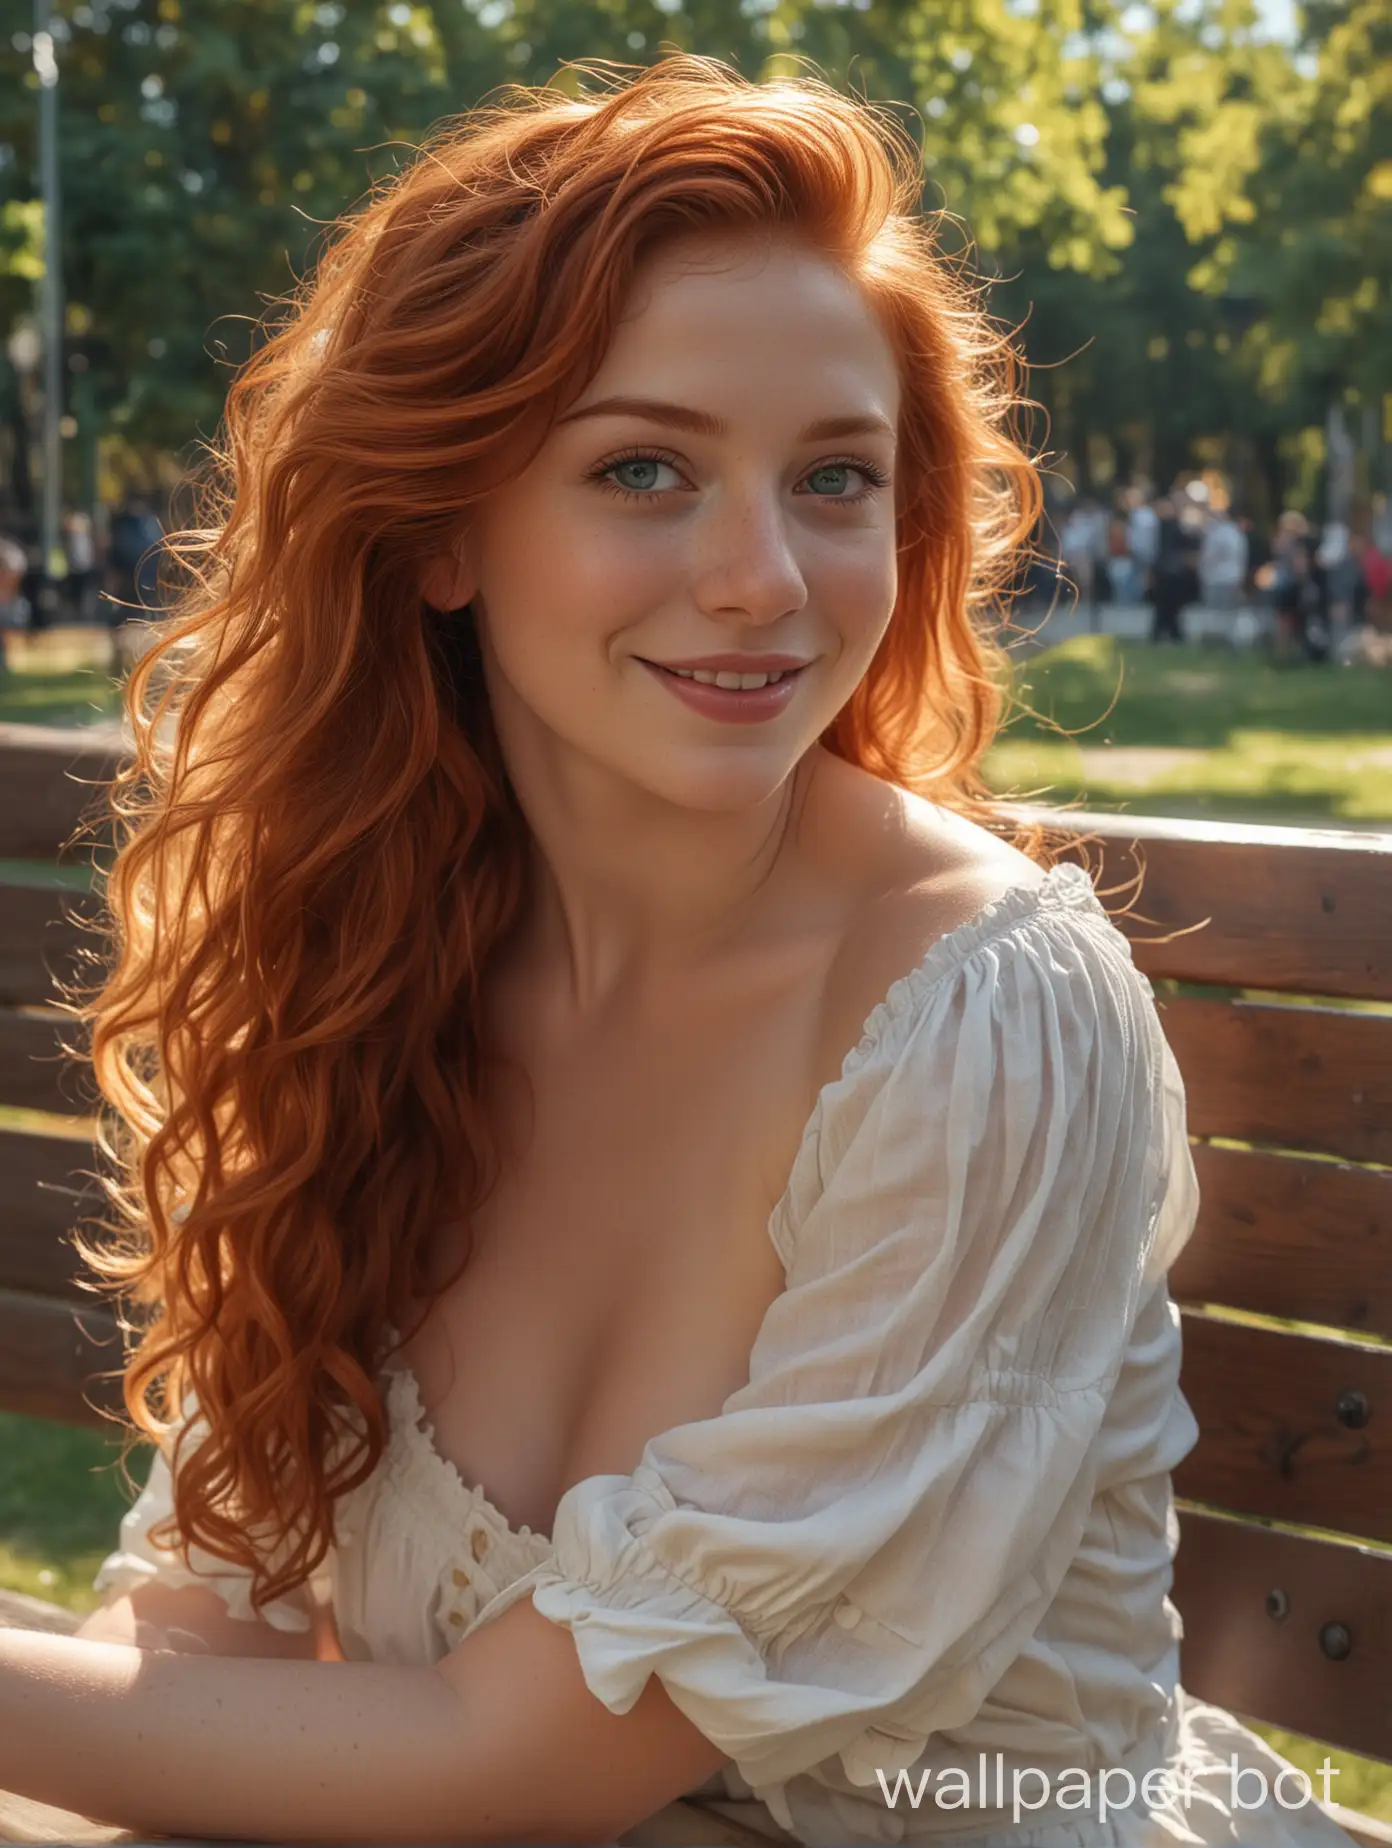 Redheaded-Maiden-with-Sunlit-Smile-on-Festival-Bench